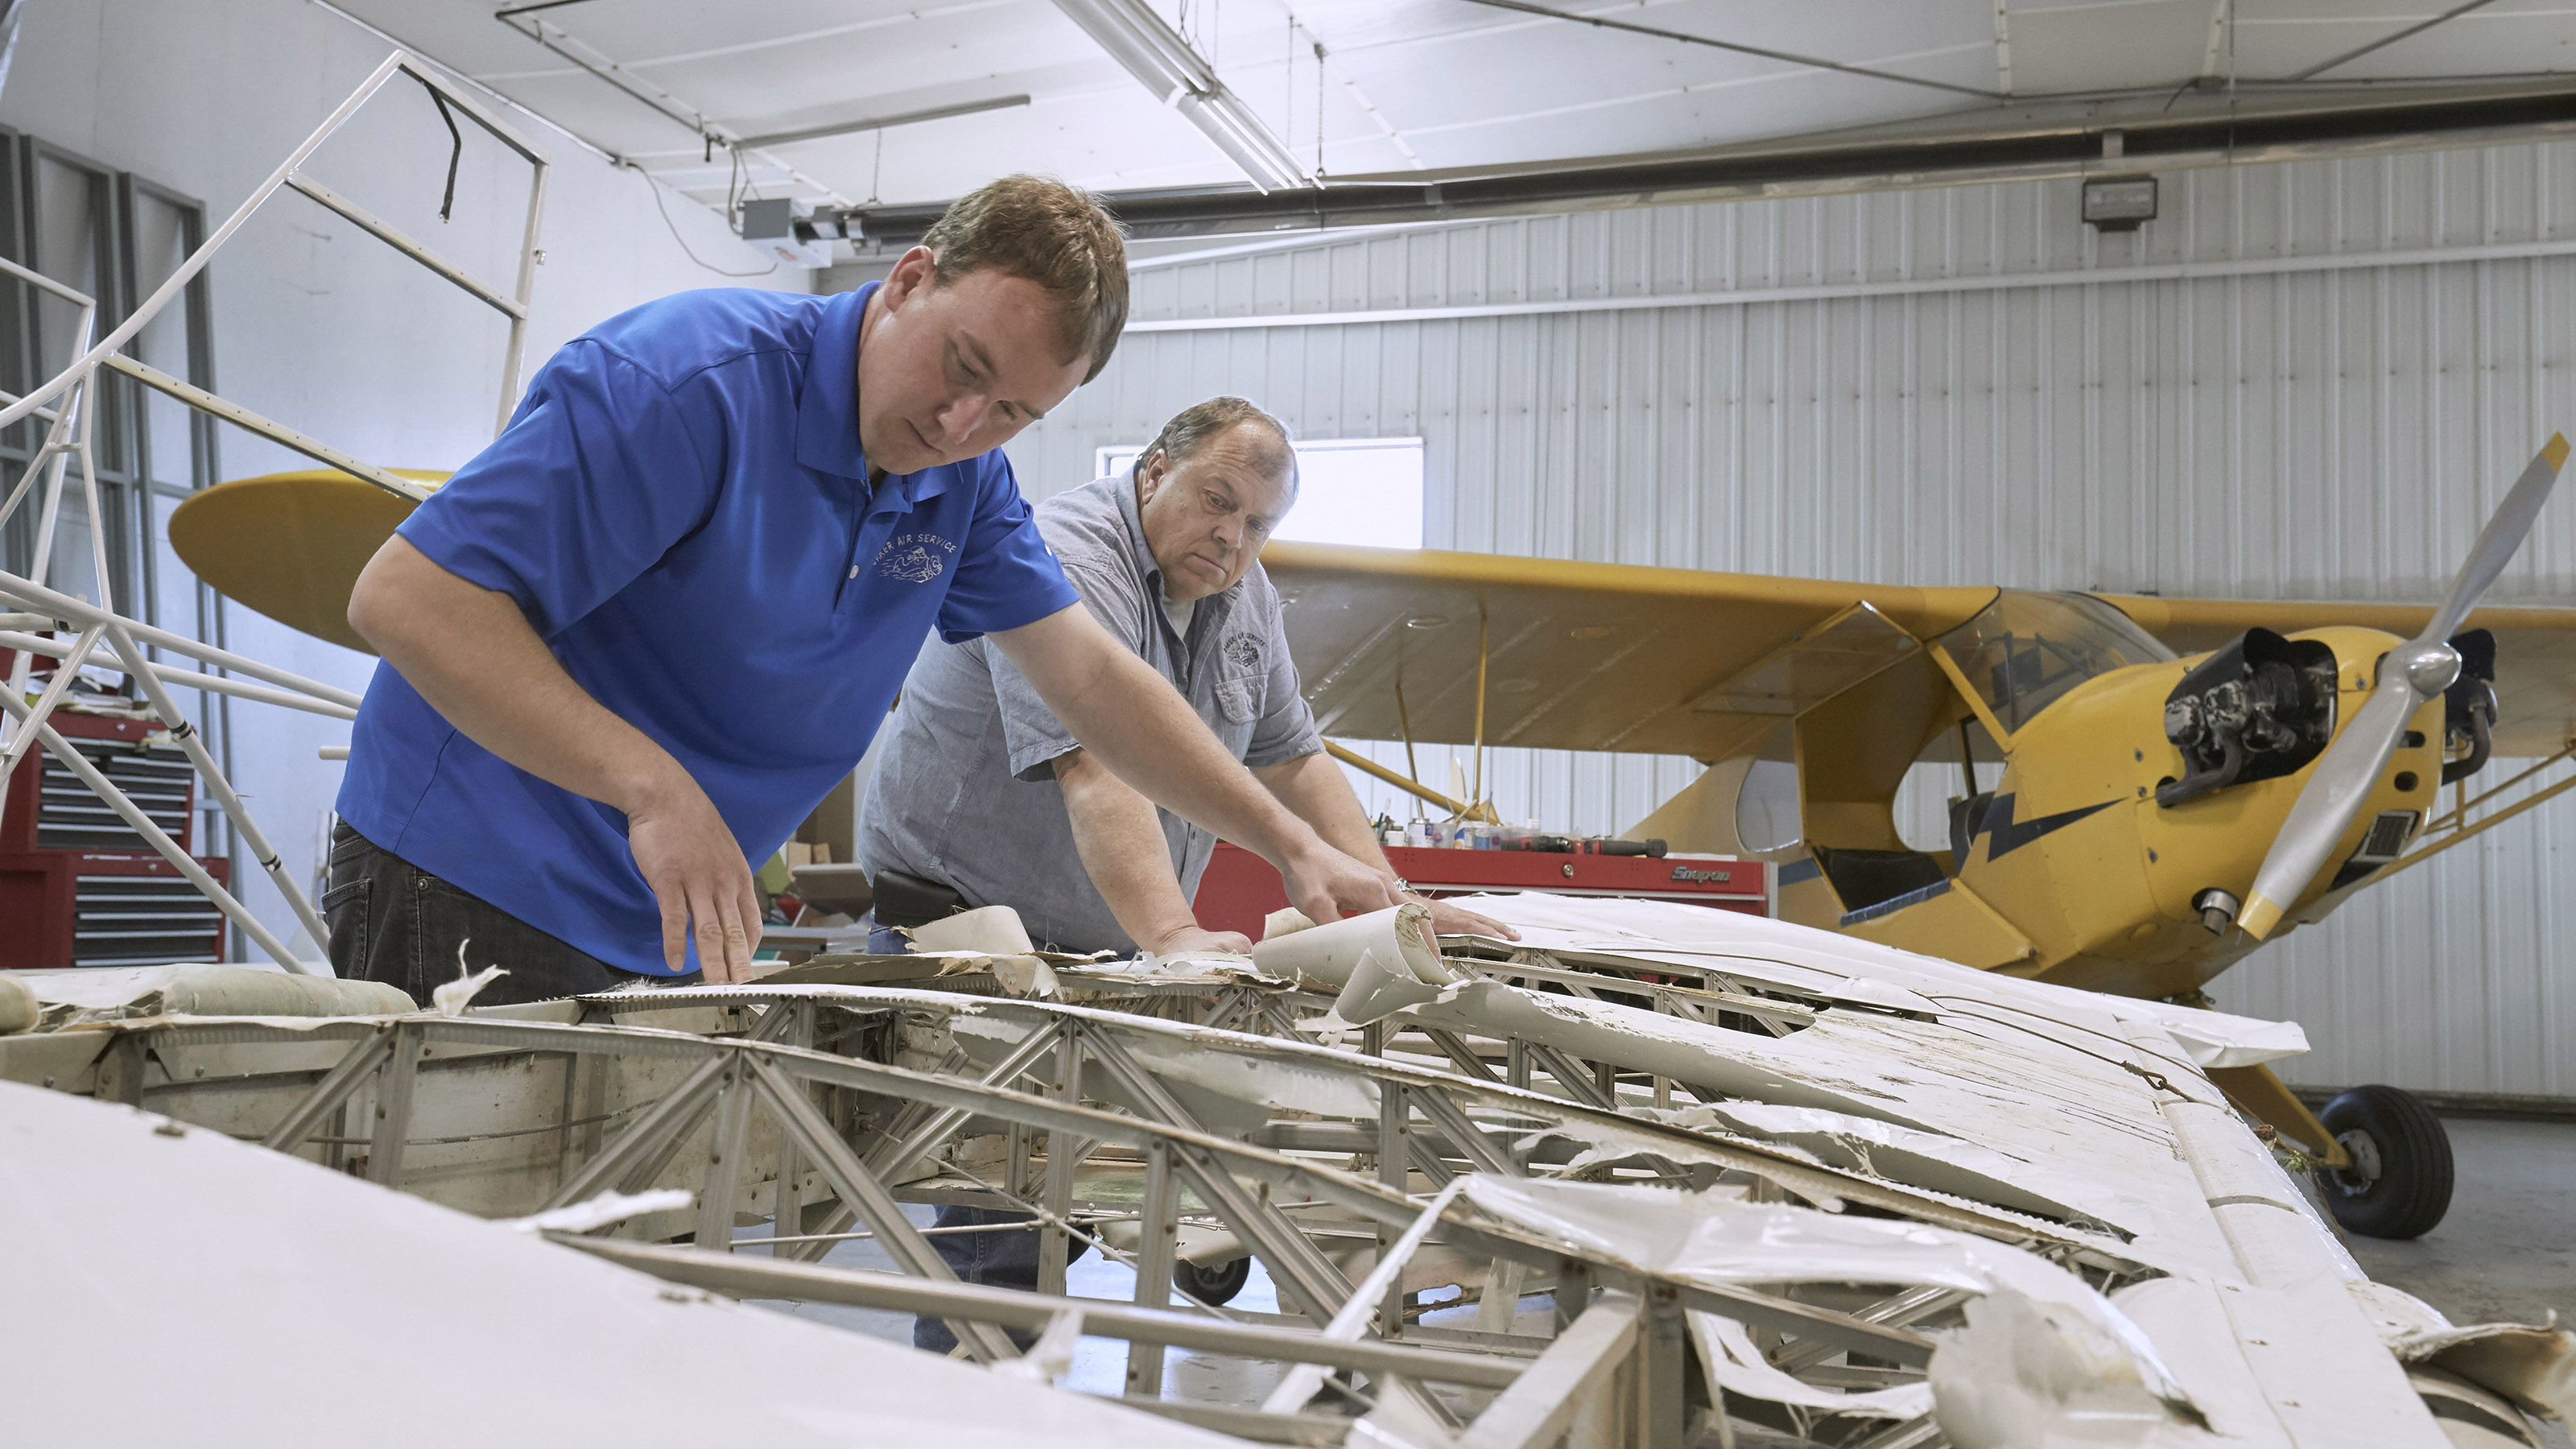 Darin (front) and Roger Meggers inspect the Piper Super Cub's damaged wings. Photo by Mike Fizer.